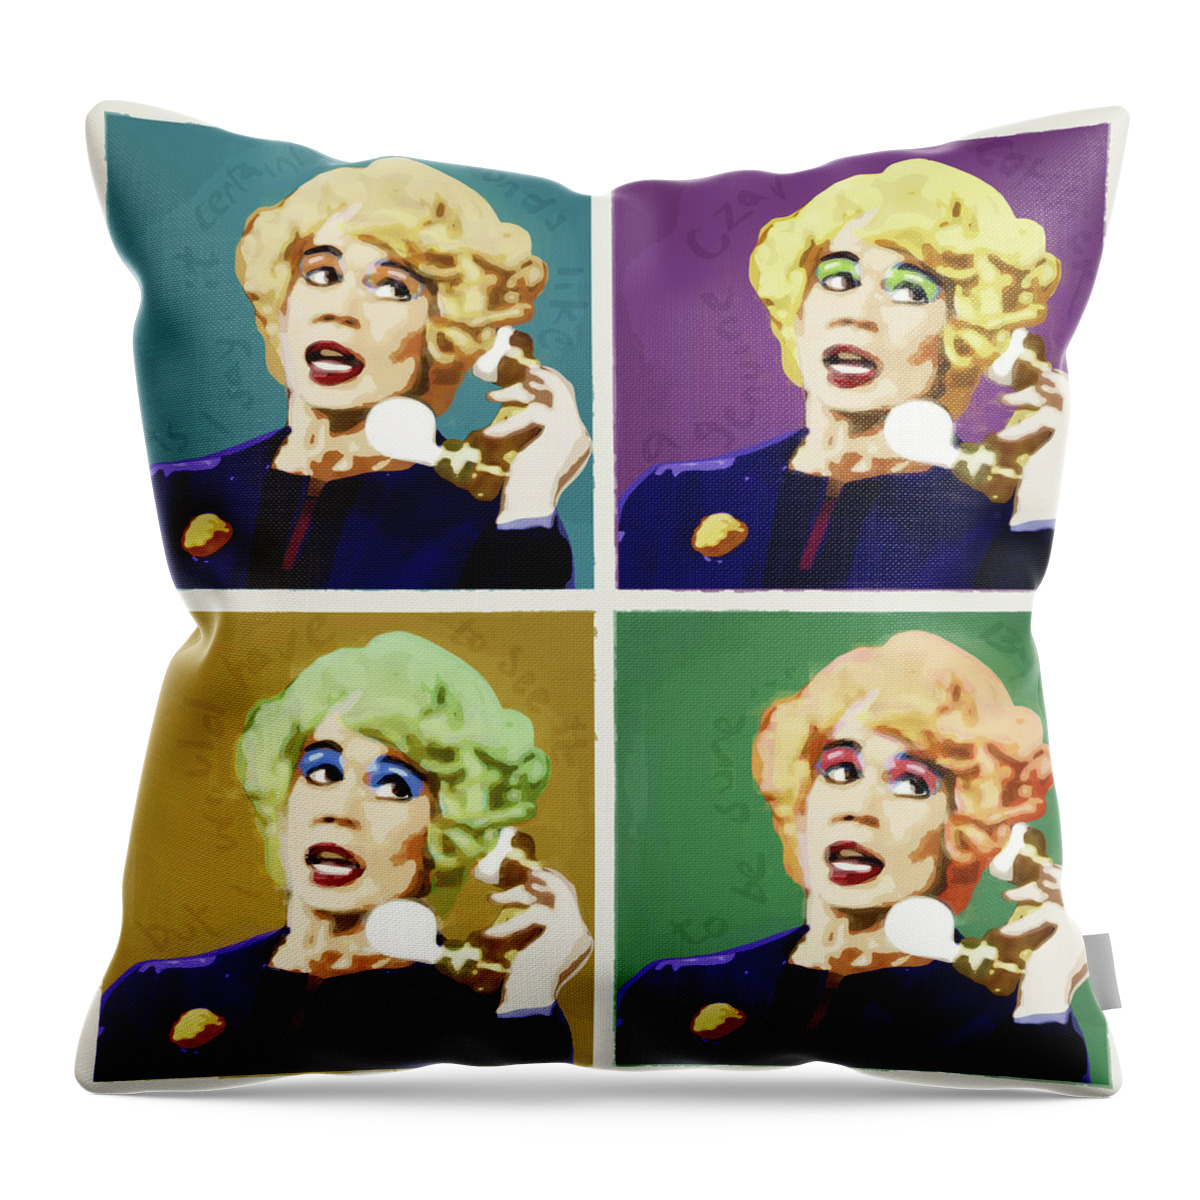 Miss Babs Throw Pillow featuring the digital art Miss Babs, Acorn Antiques by Big Fat Arts